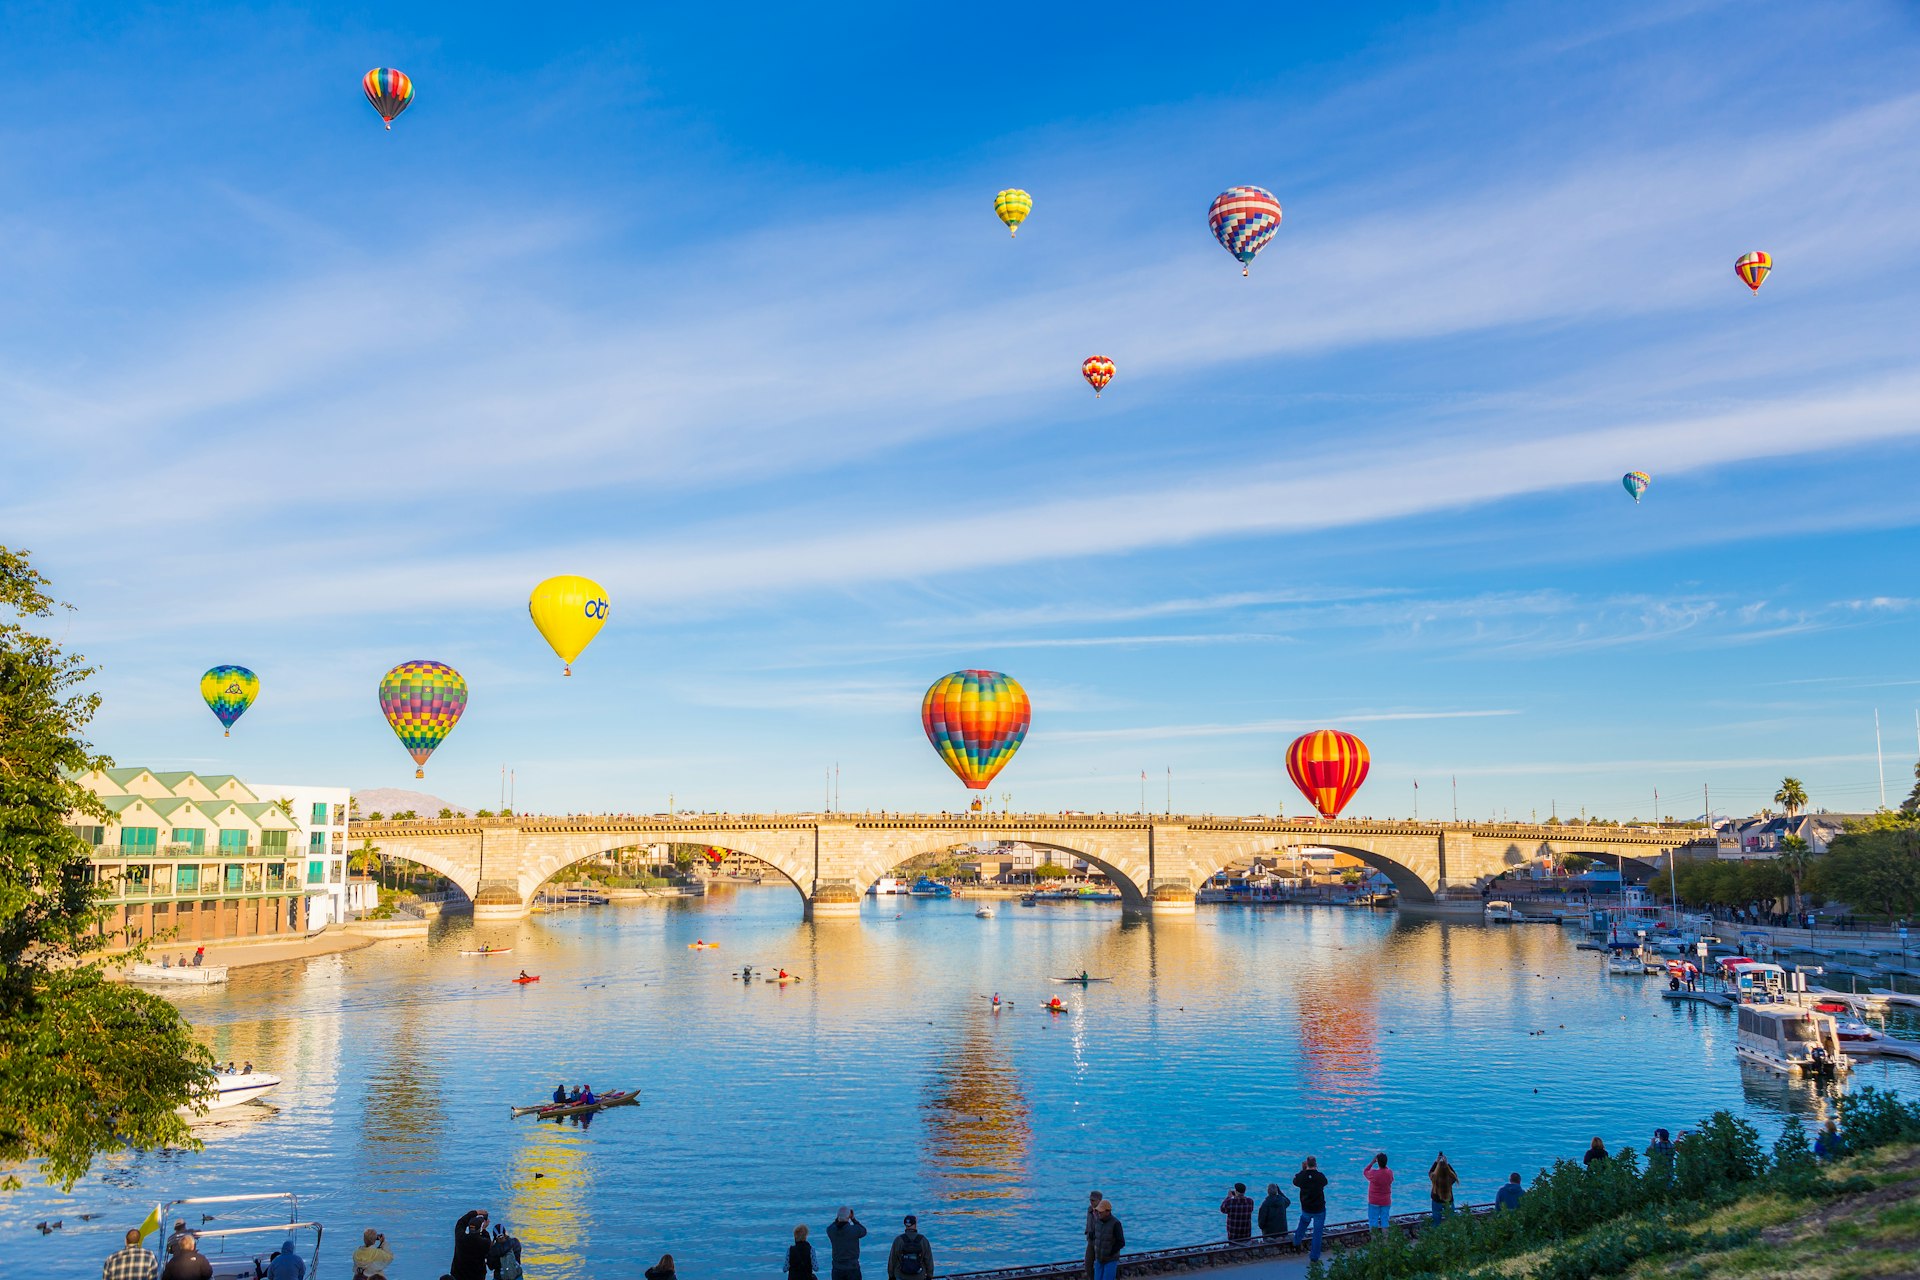 Hot air ballons rise over an arched bridge